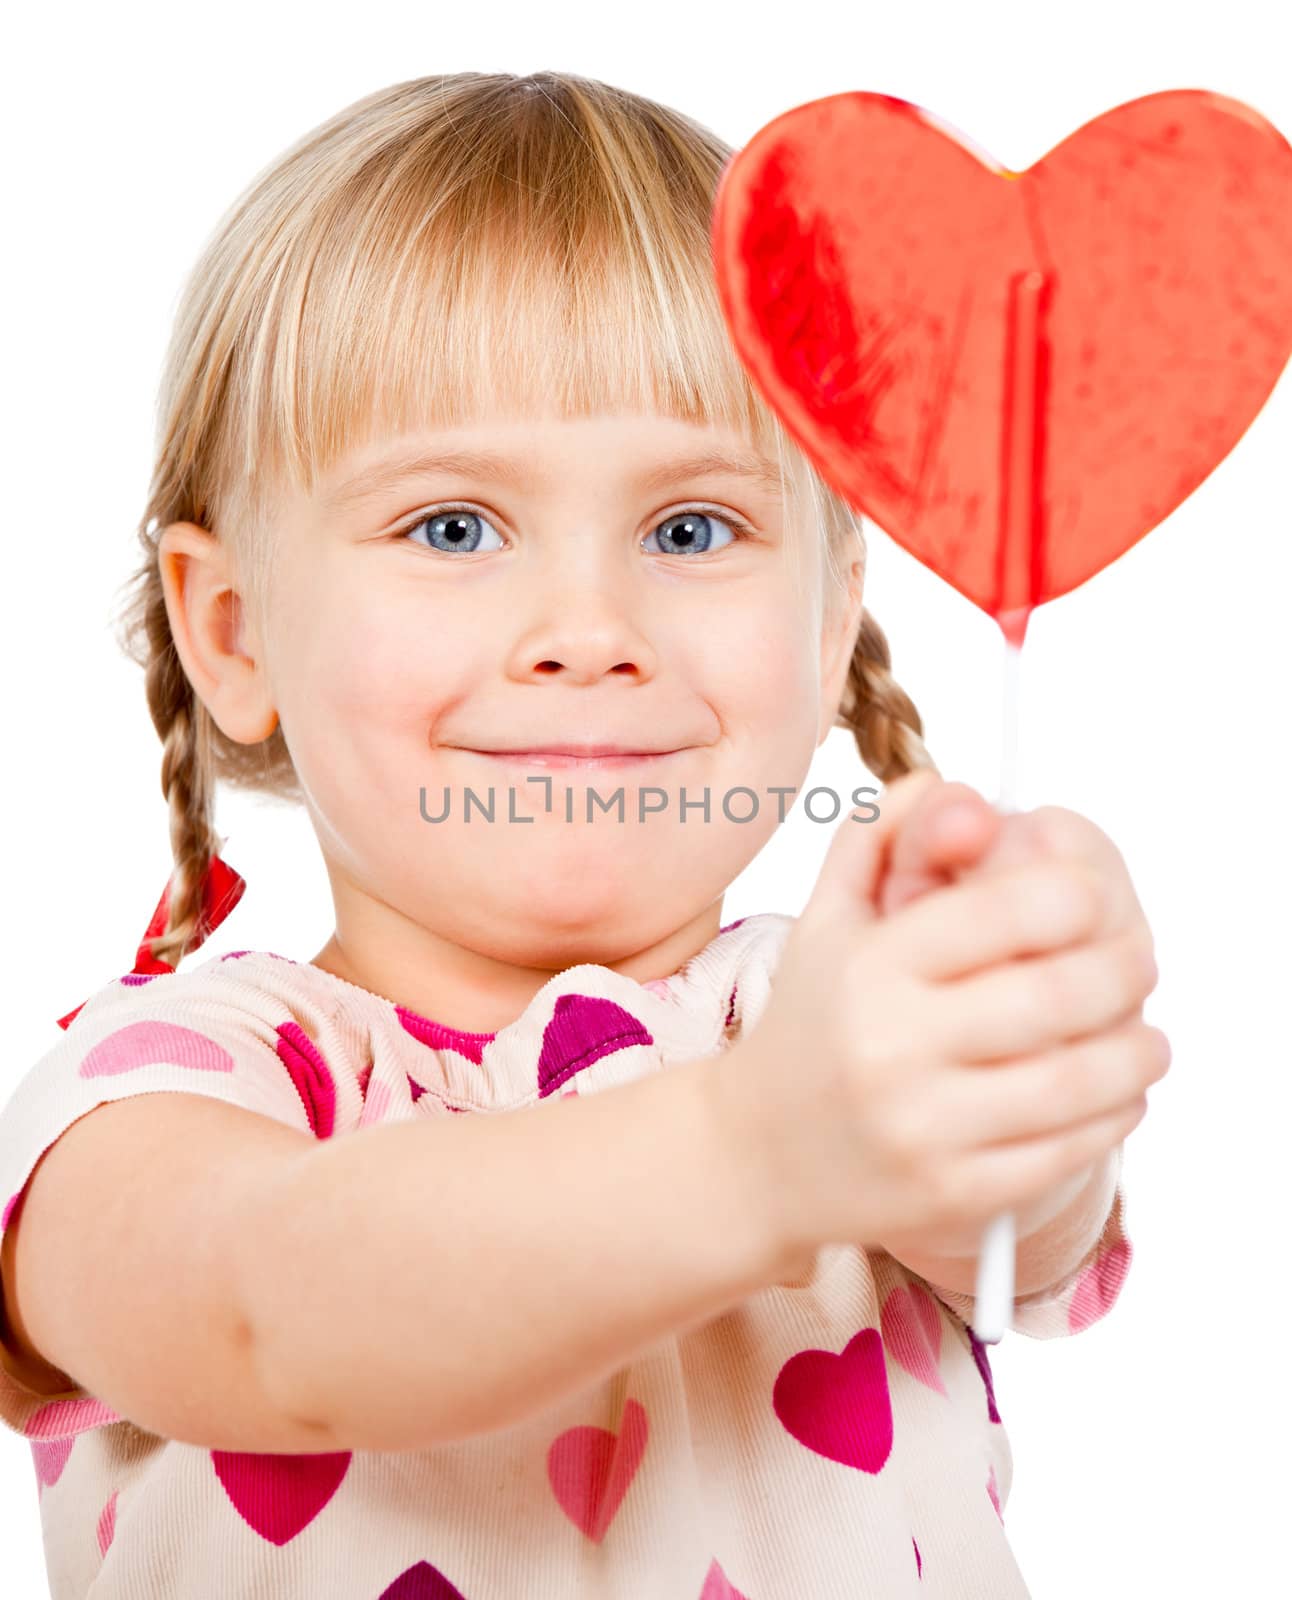 Child with lollypop by naumoid